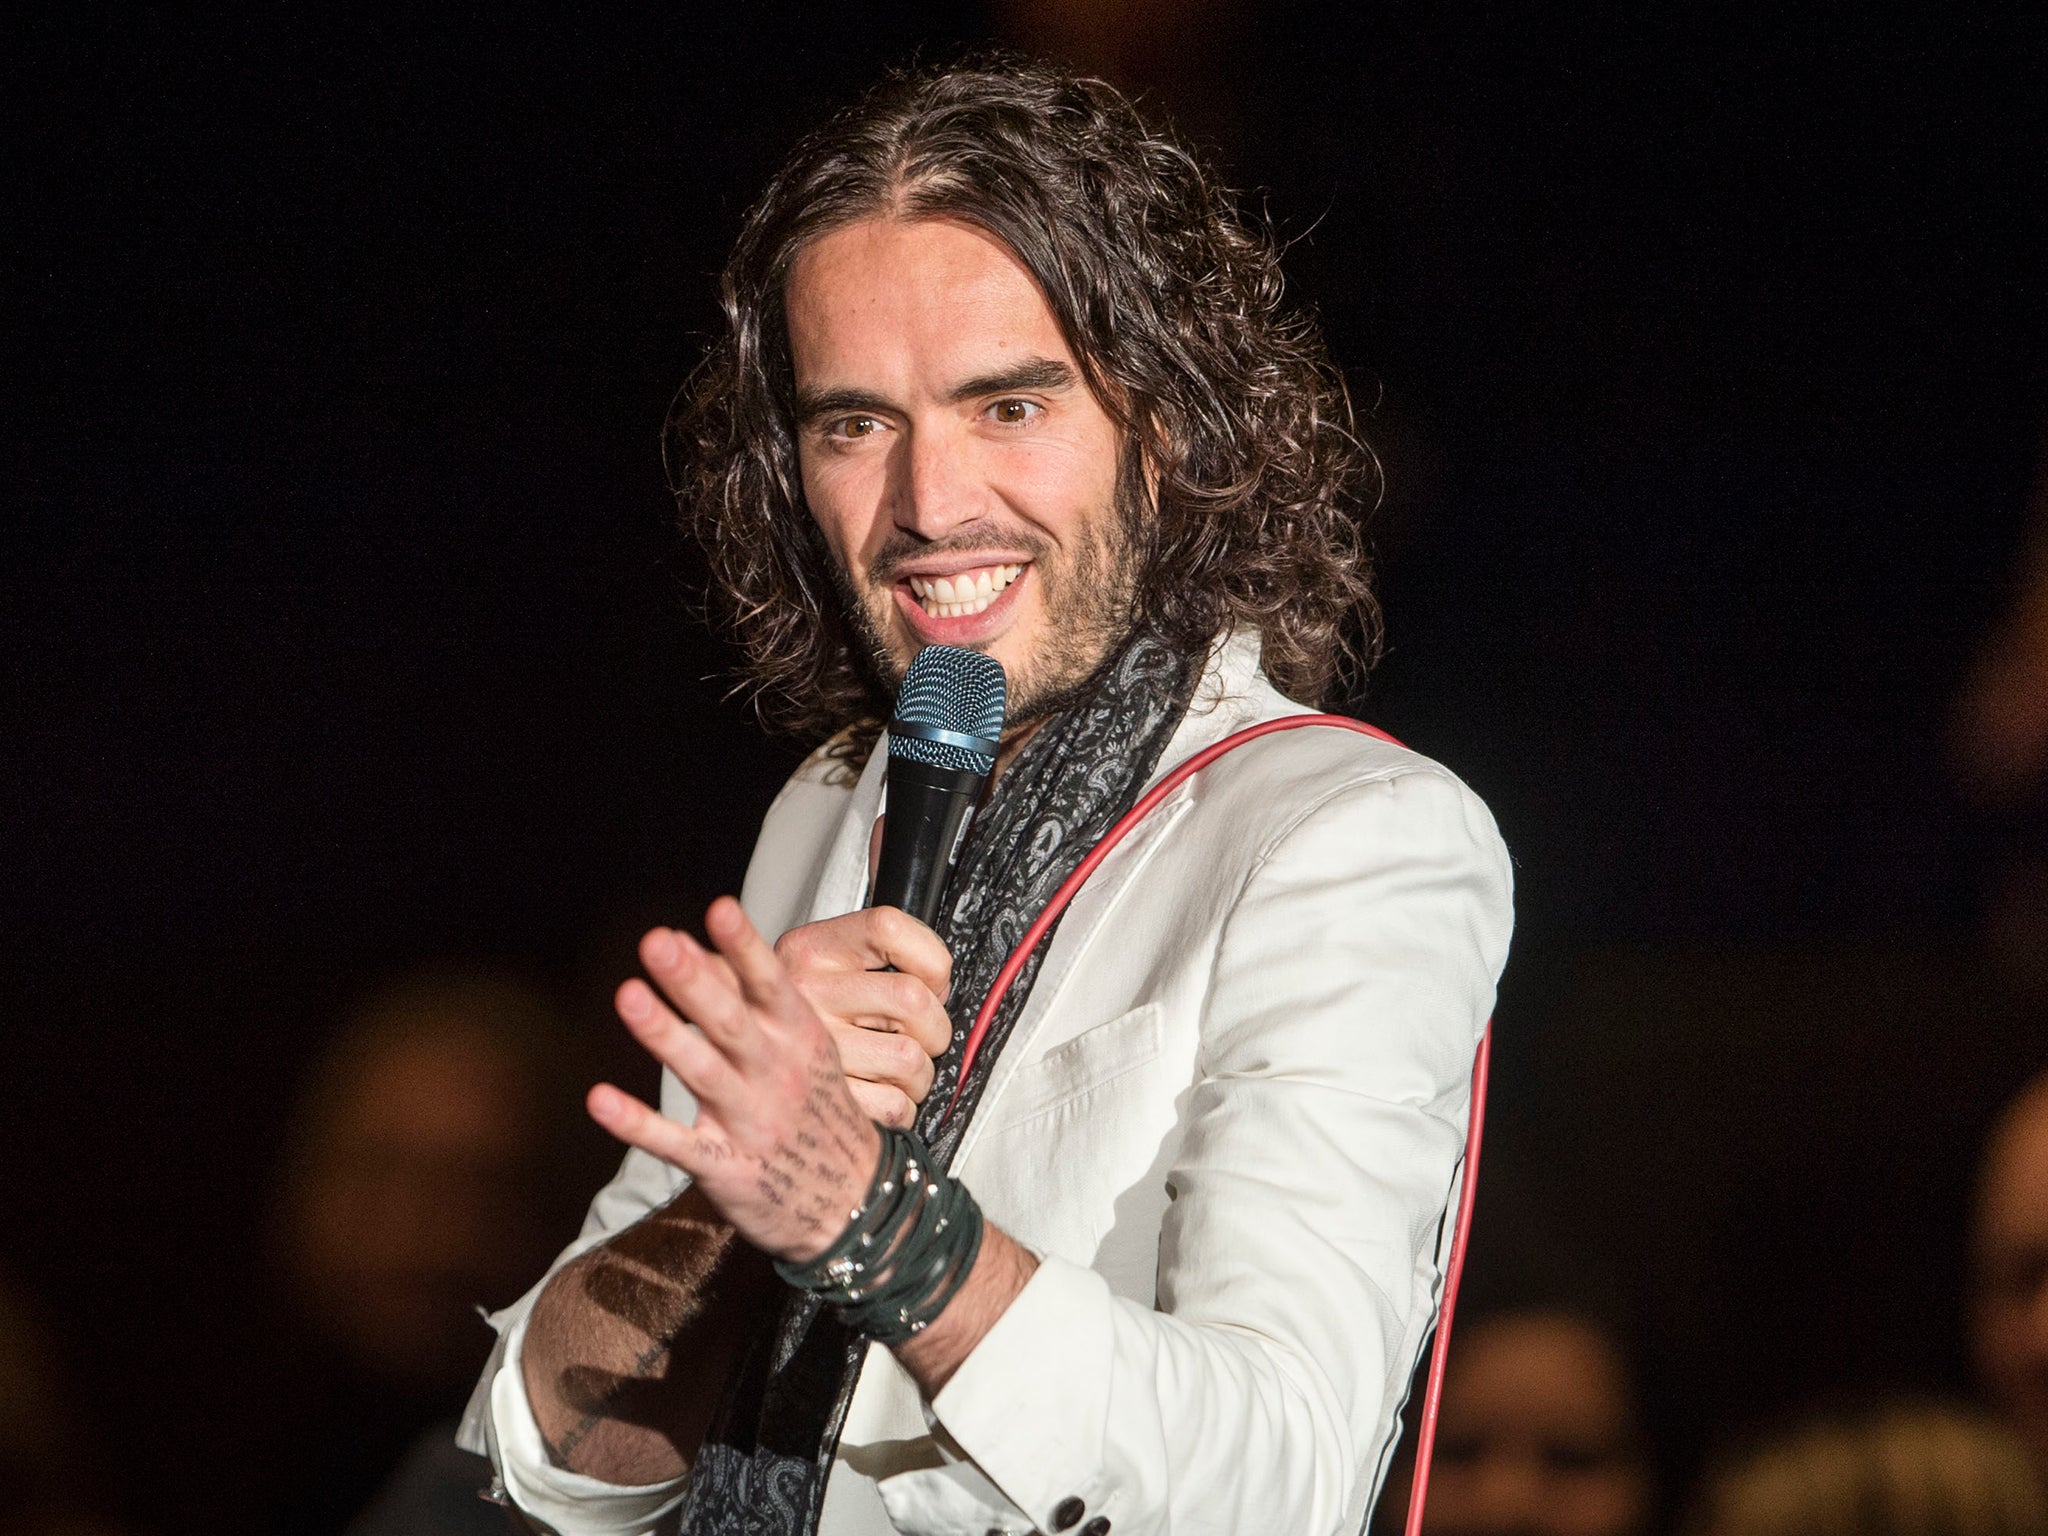 Russell Brand says he is open to 9/11 conspiracy theories